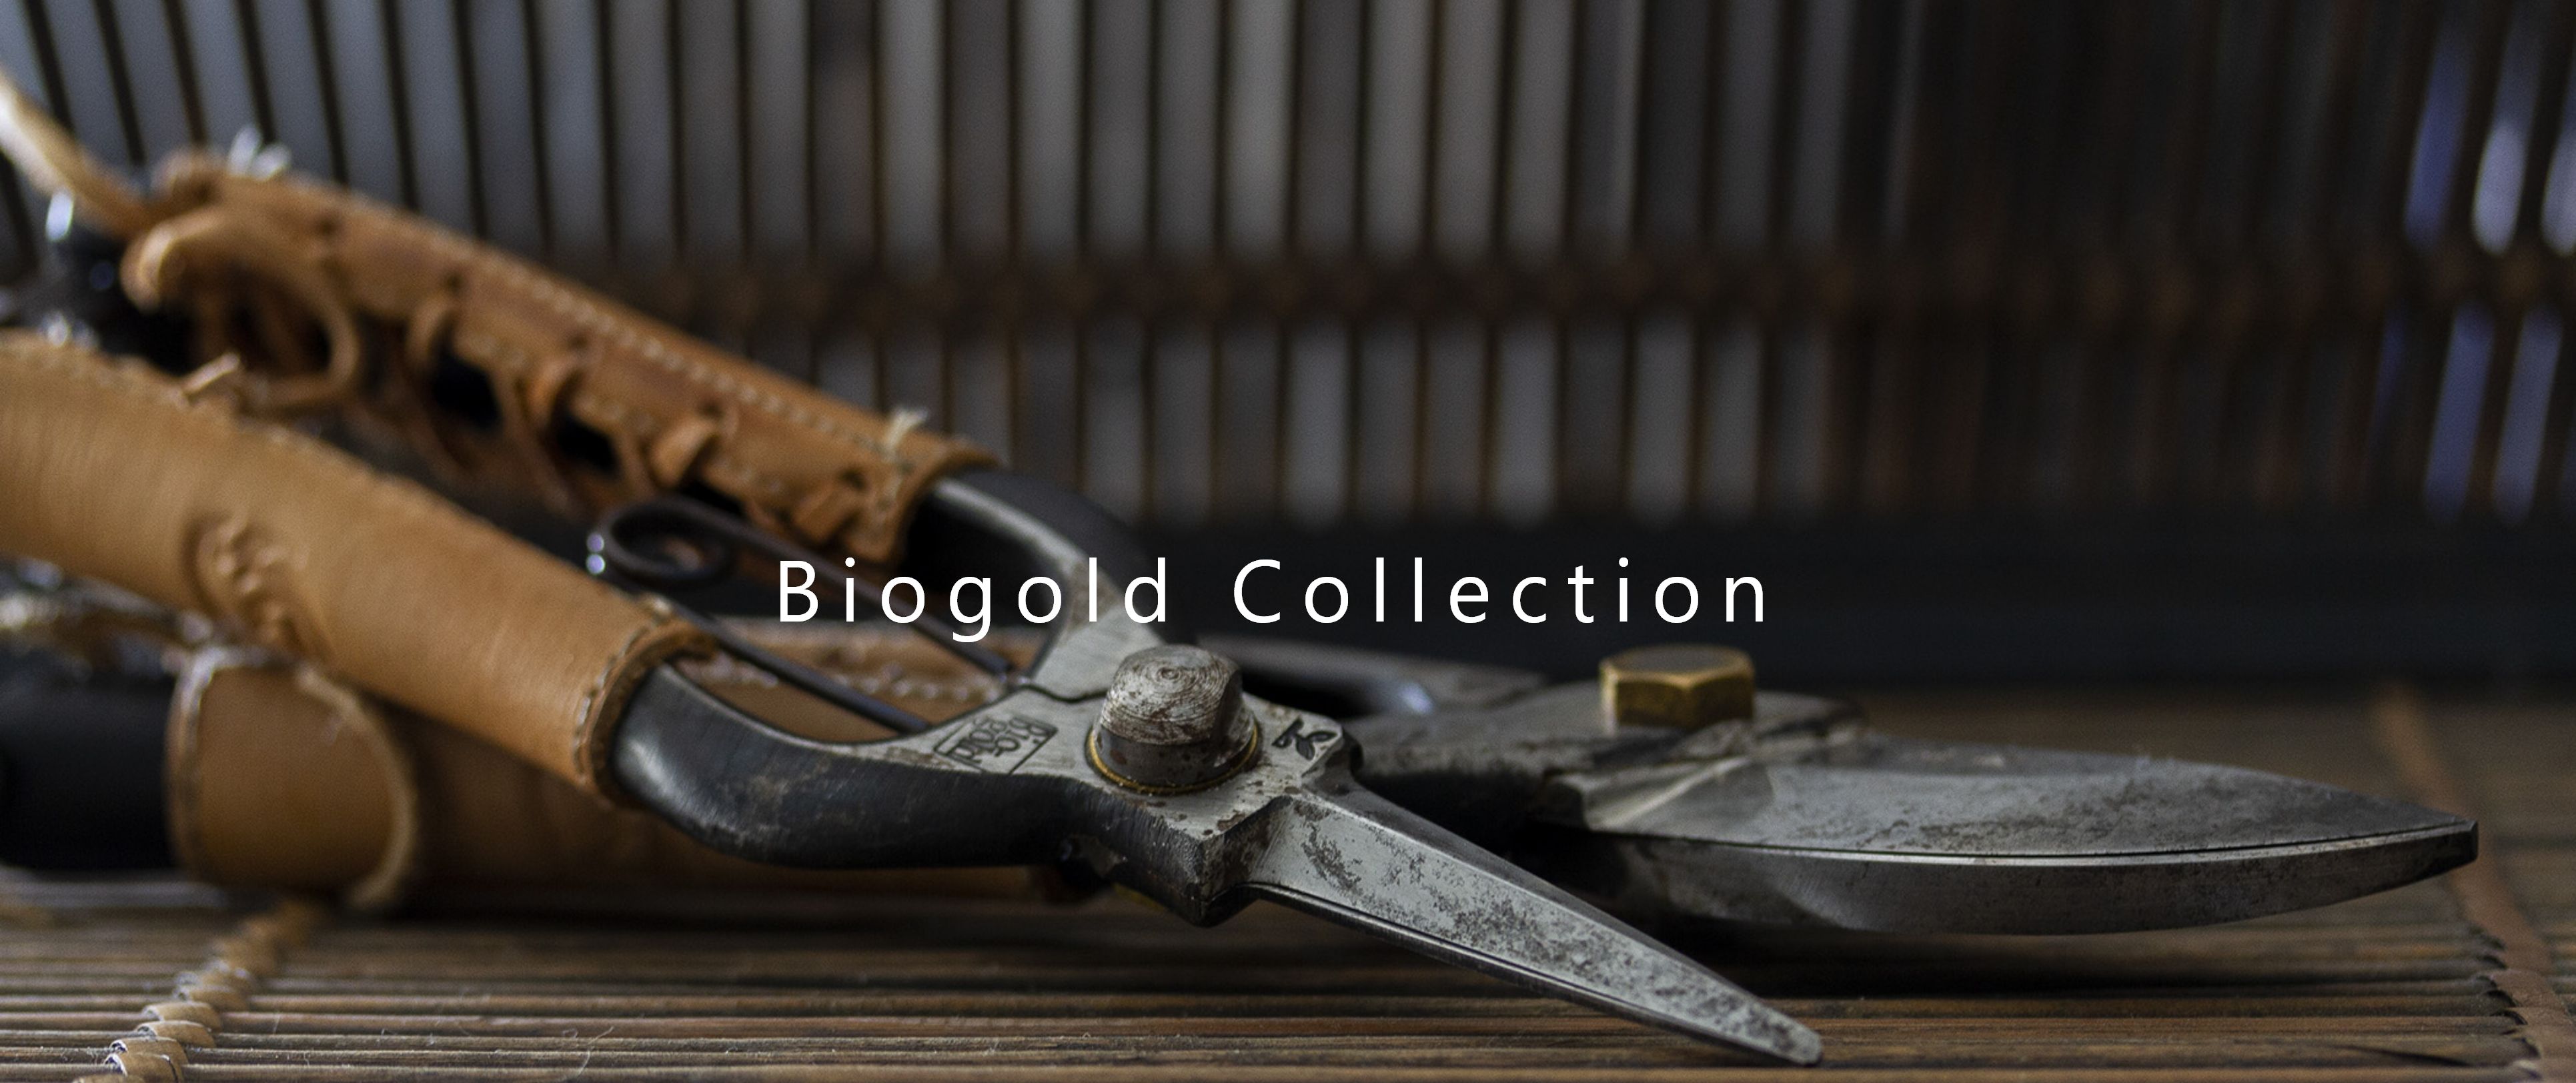 Biogold Collection